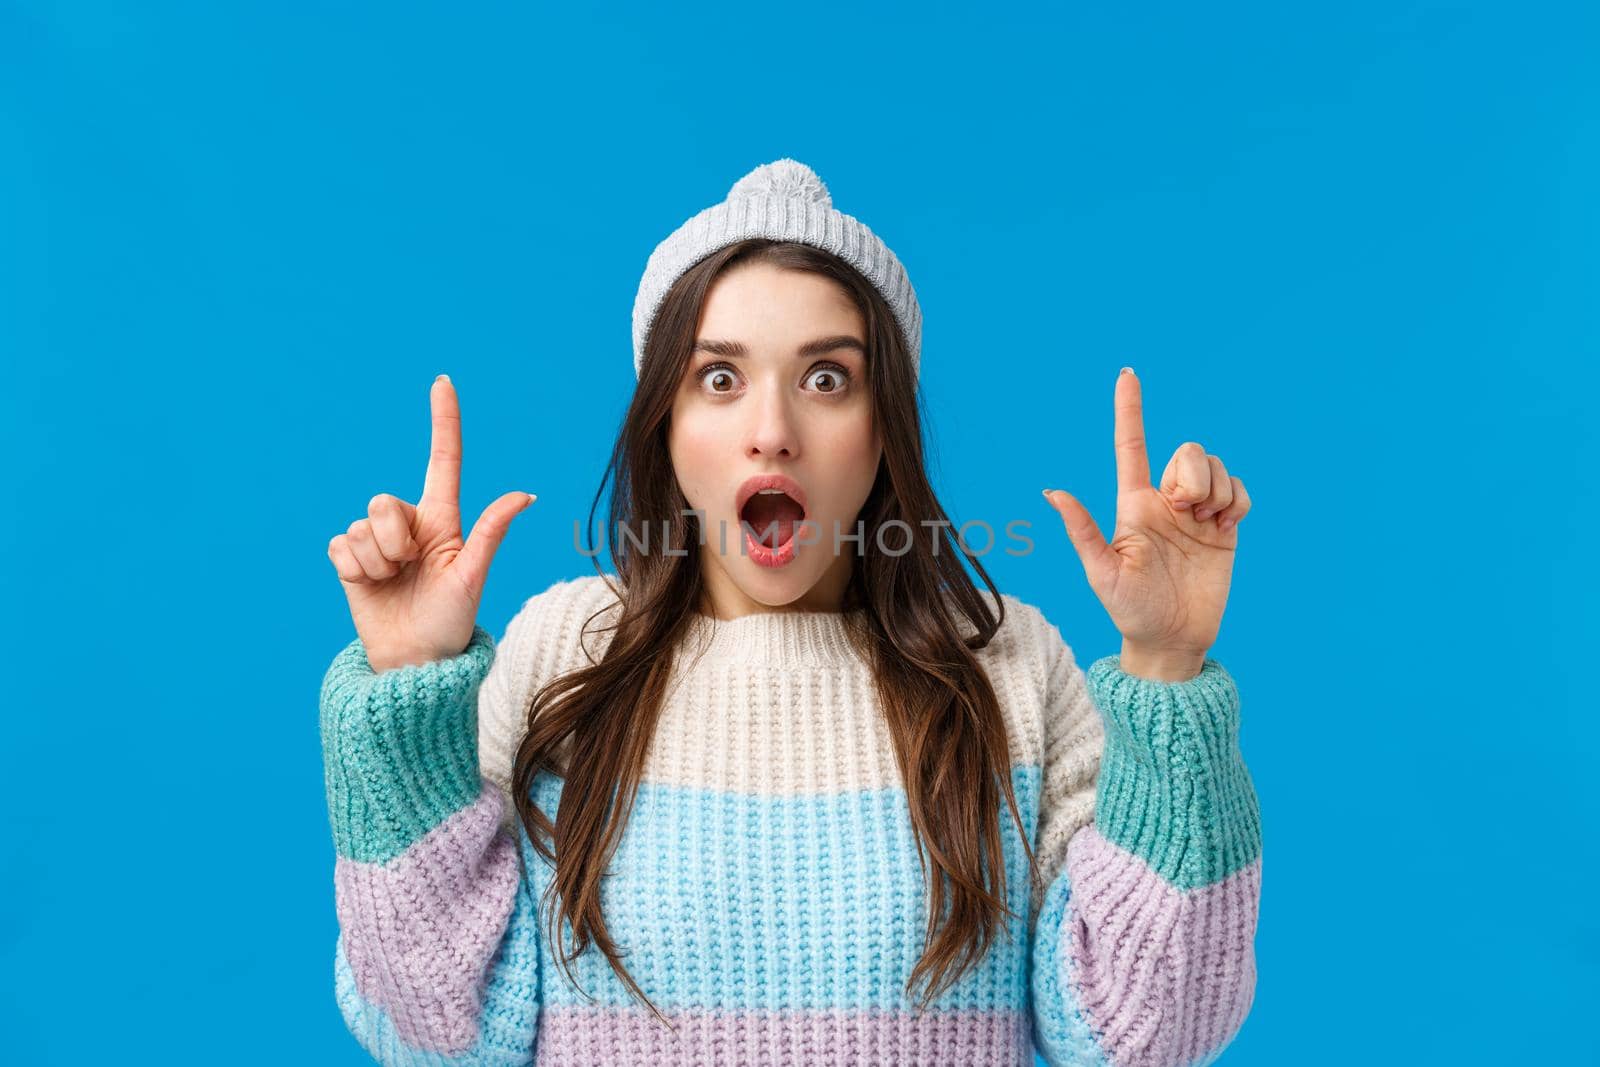 Check this out, omg. Astonished and excited girl, shopaholic found excellent discounts special for students, shopping winter holidays, gasping drop jaw staring camera and pointing fingers up.